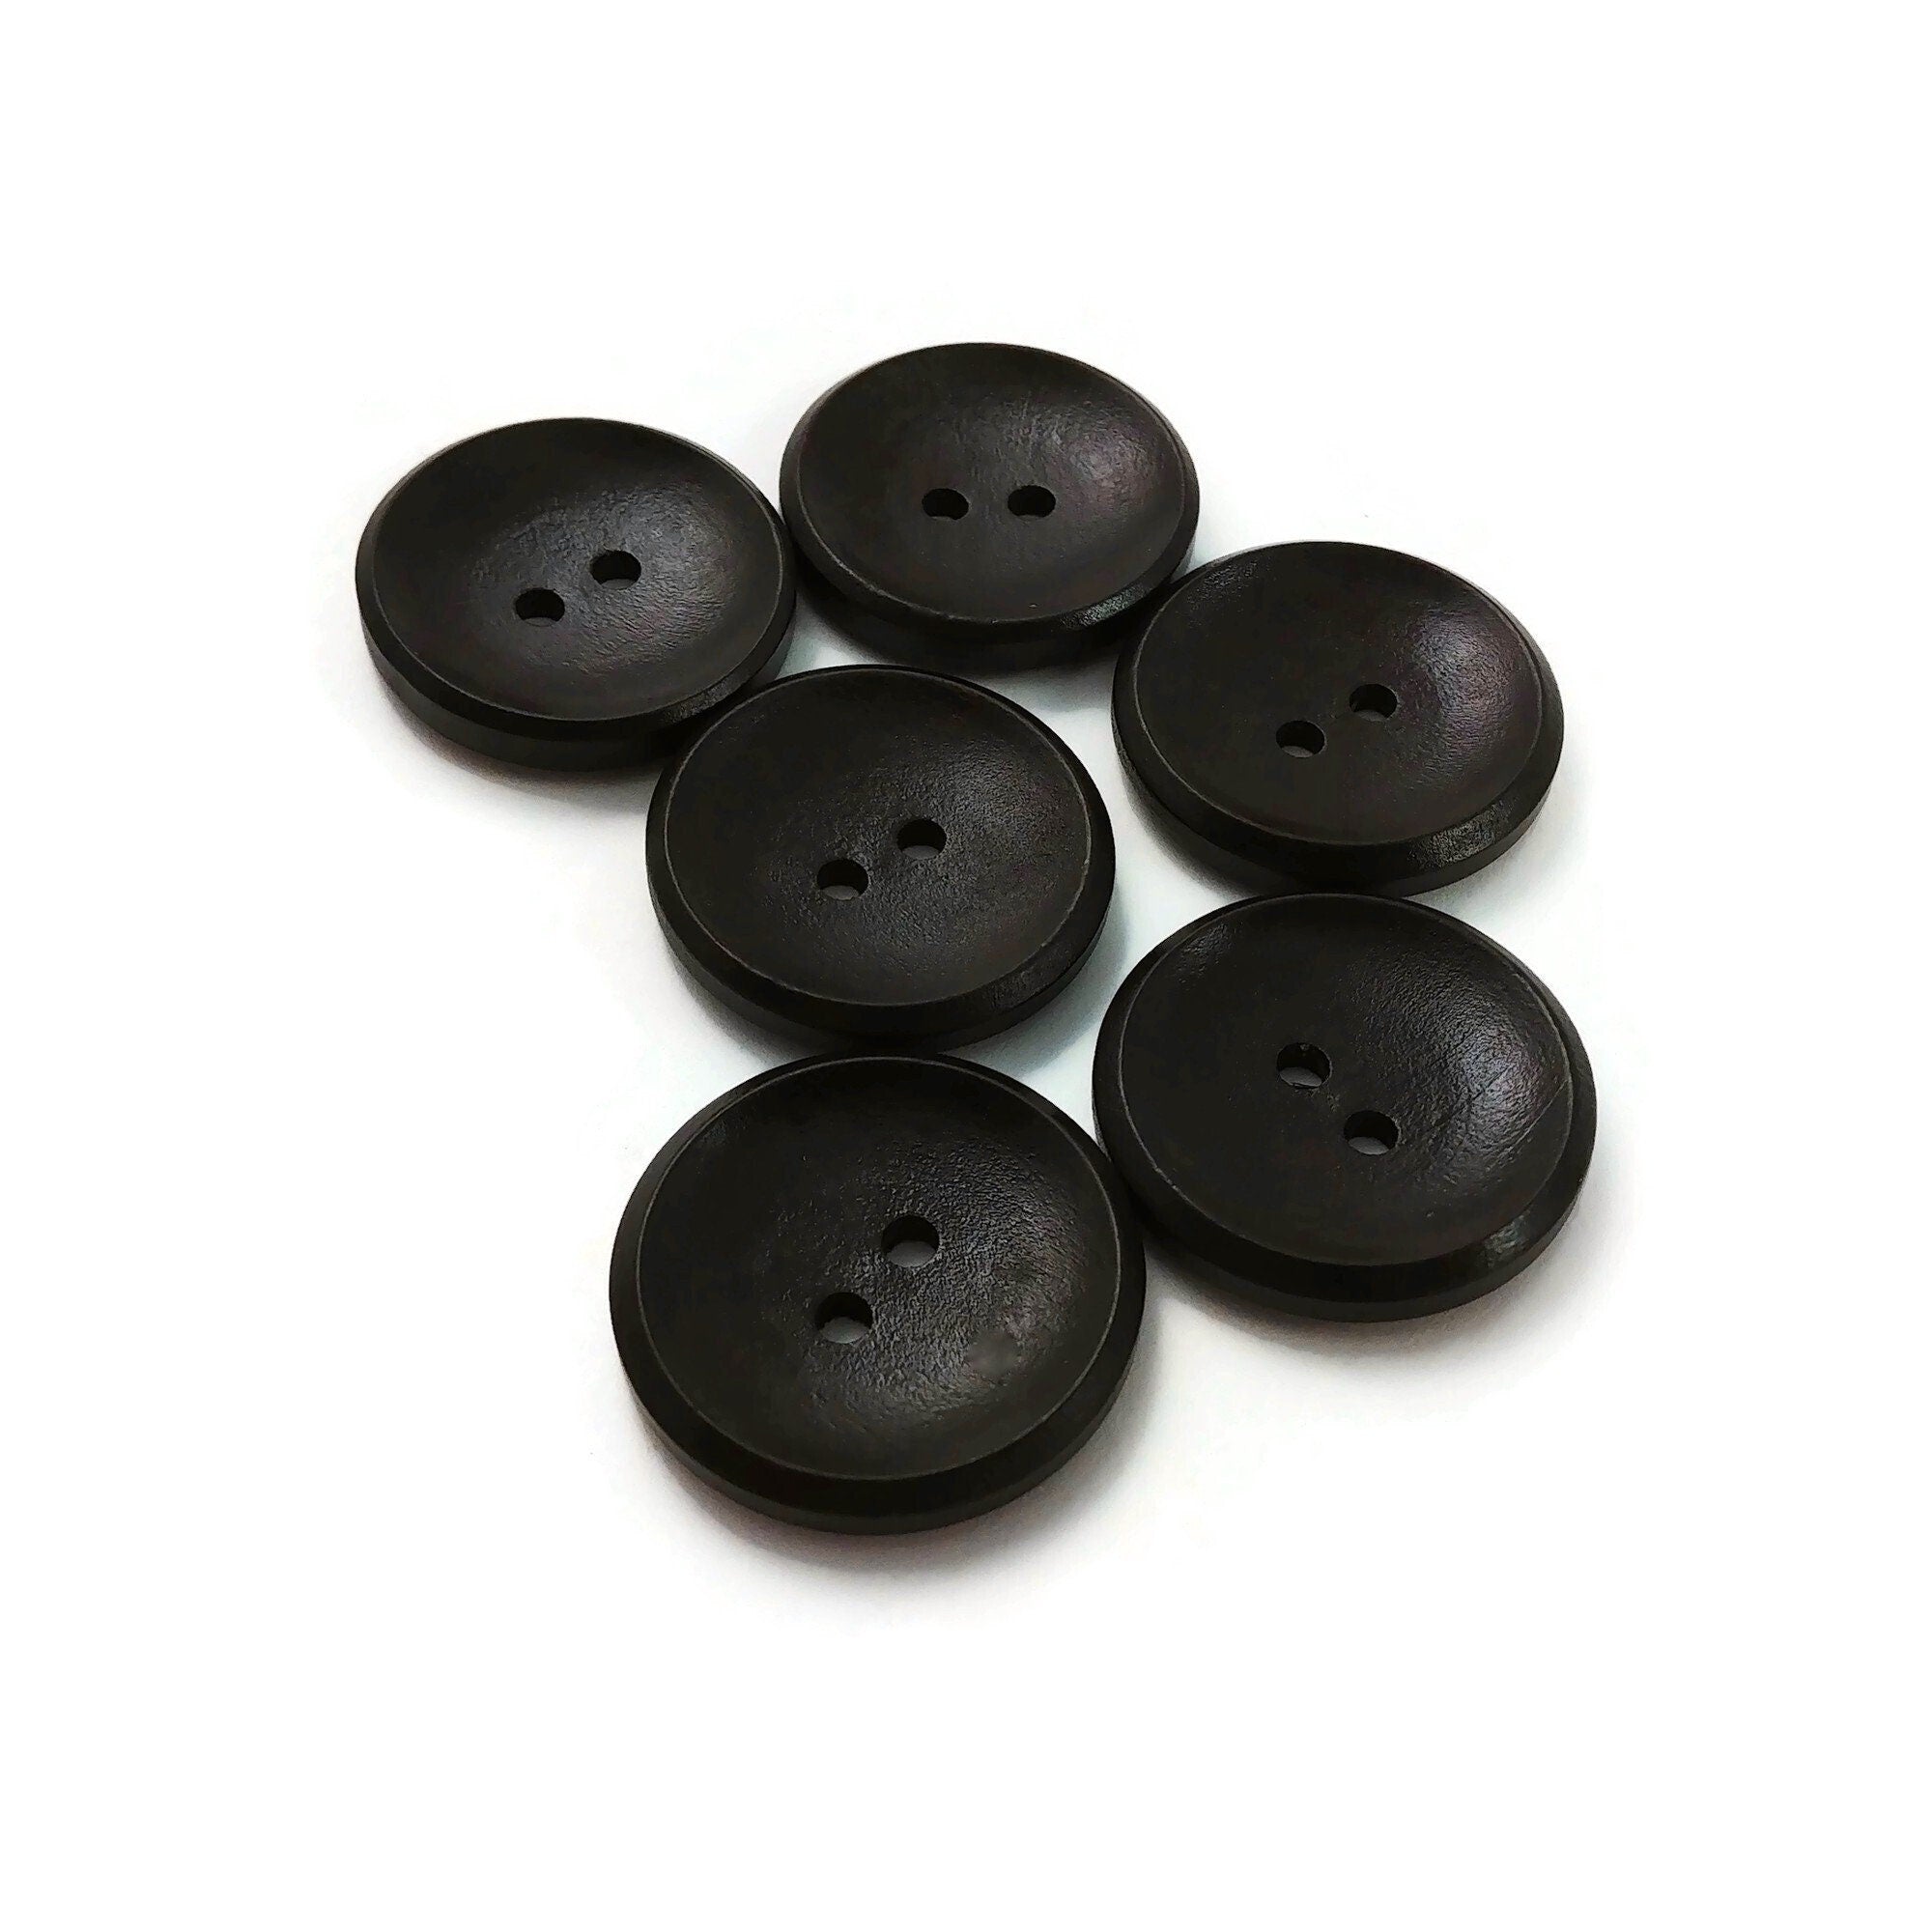 Large Buttons 4 Holes,Big Wooden Buttons,Wood Button for Sewing,25mm Craft Button,1 inch Black Brown Coffee Button 50pcs Q3372